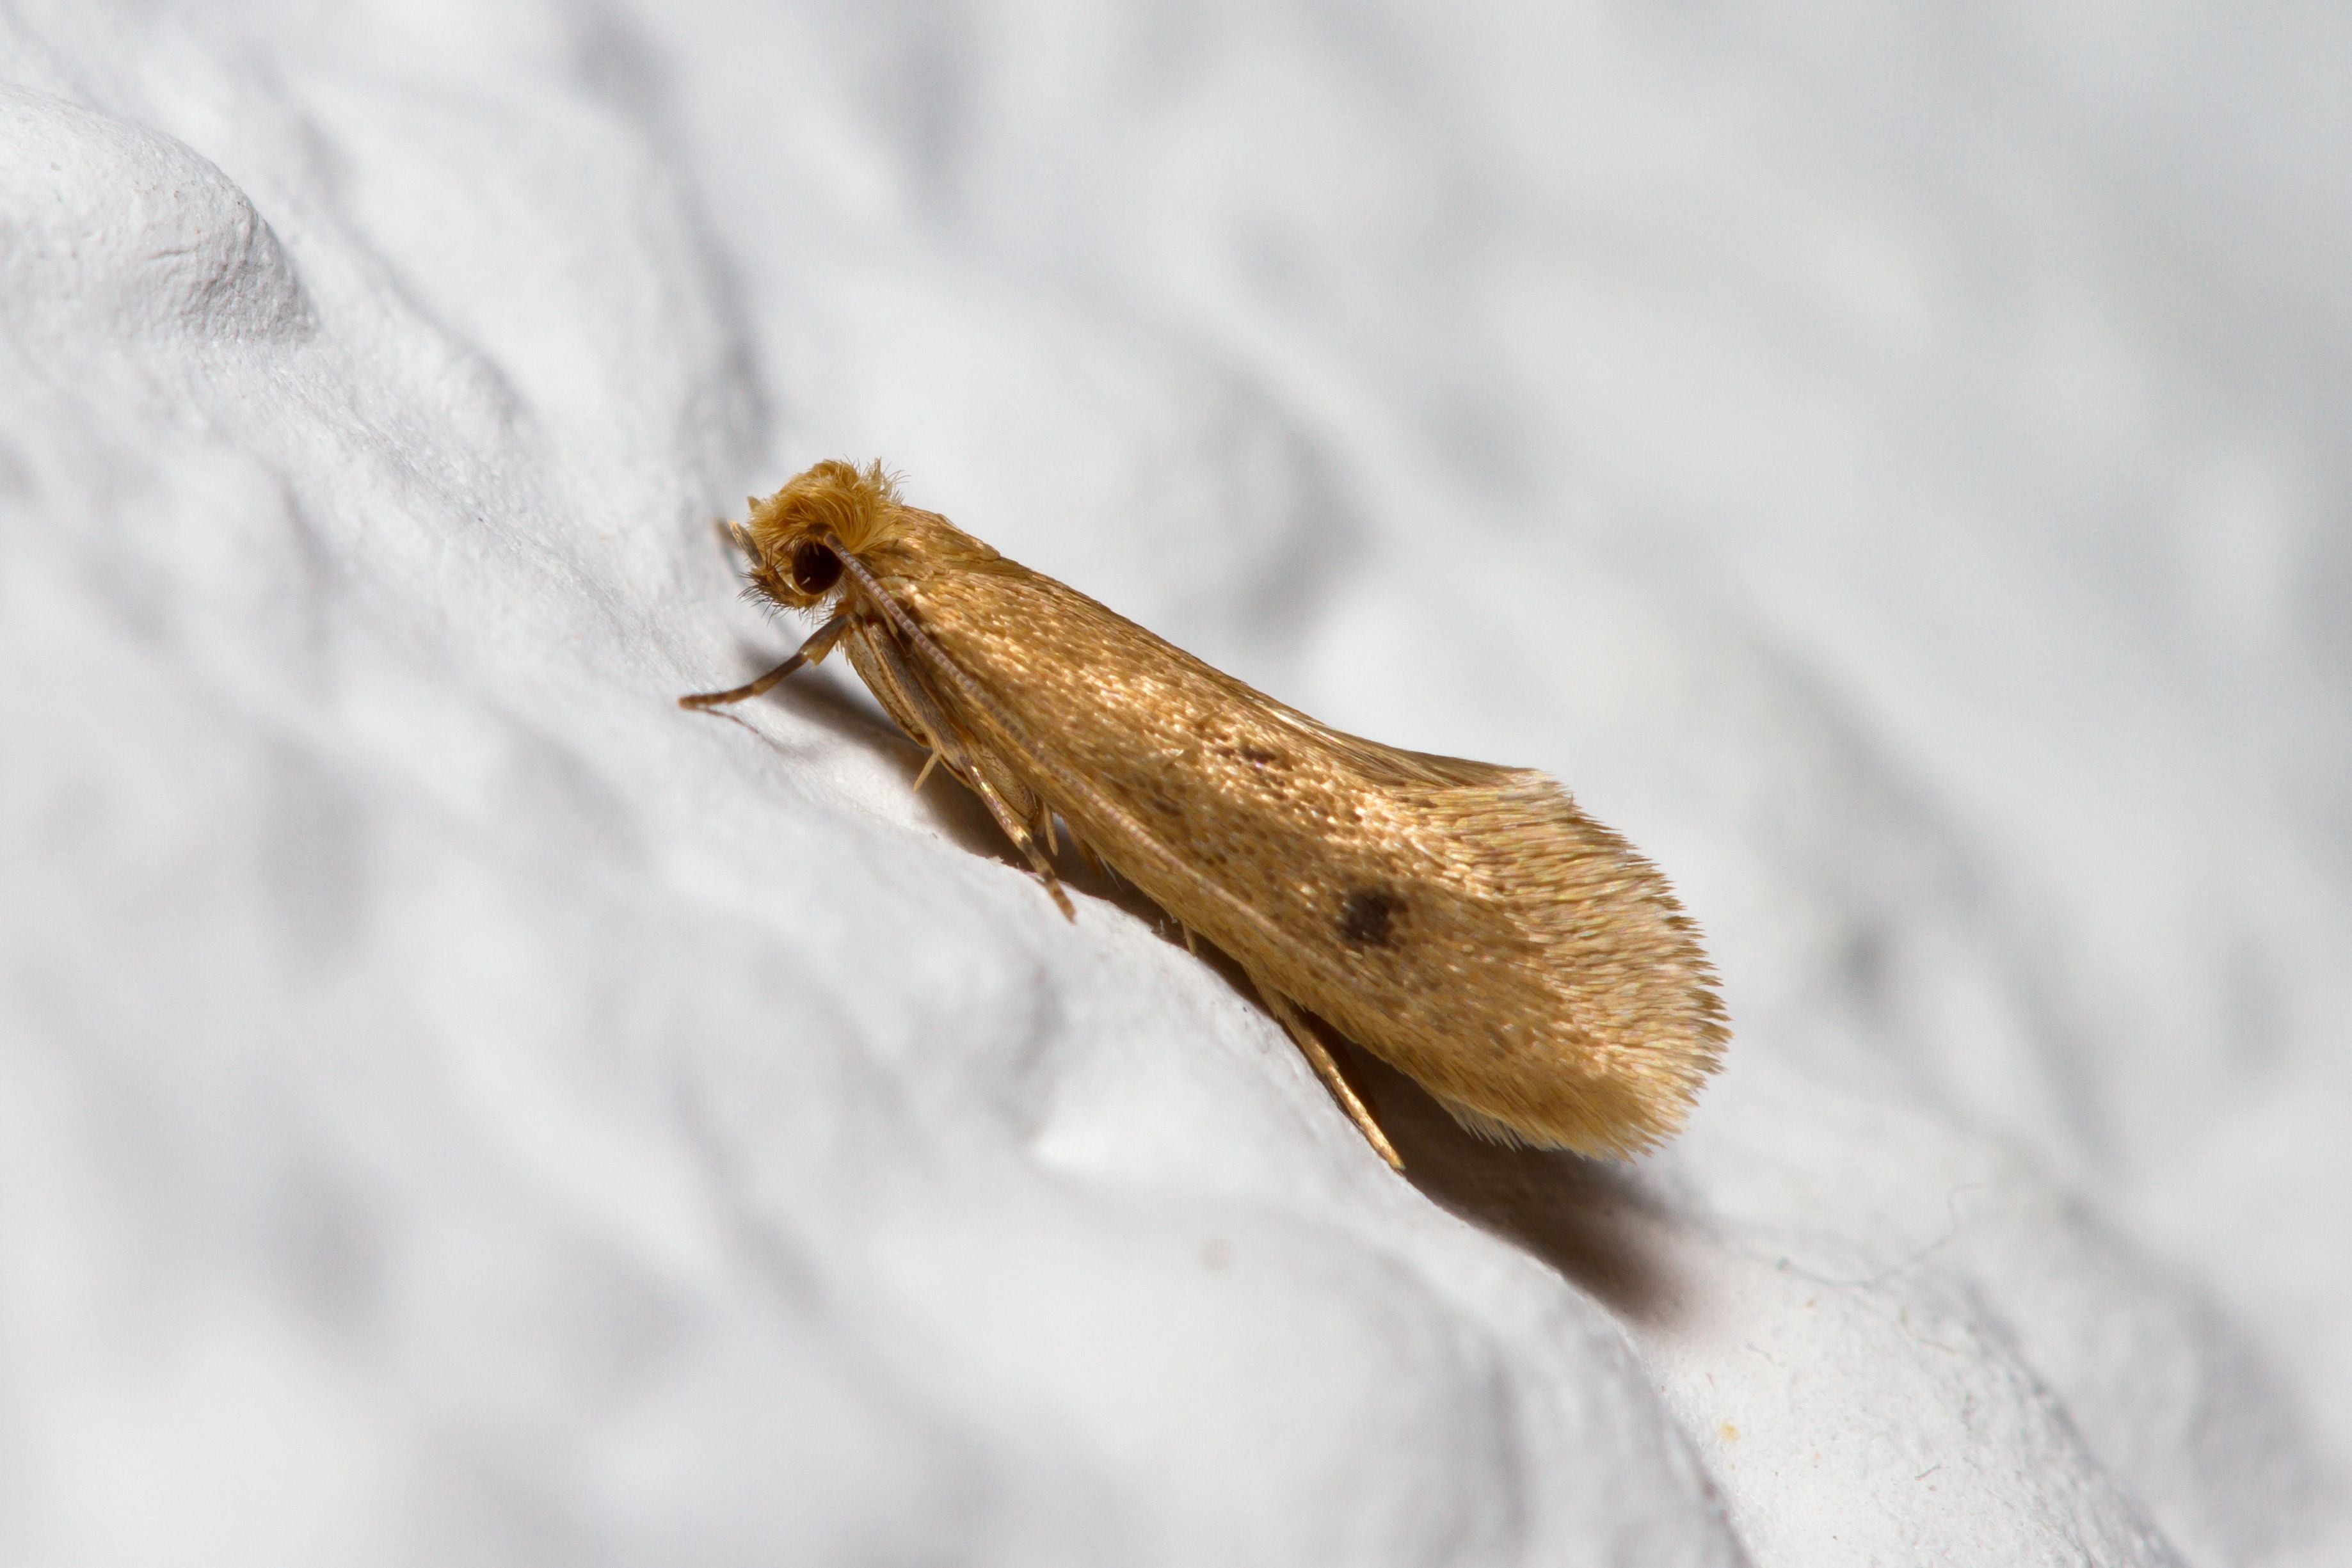 clothing moth control and treatments for the home